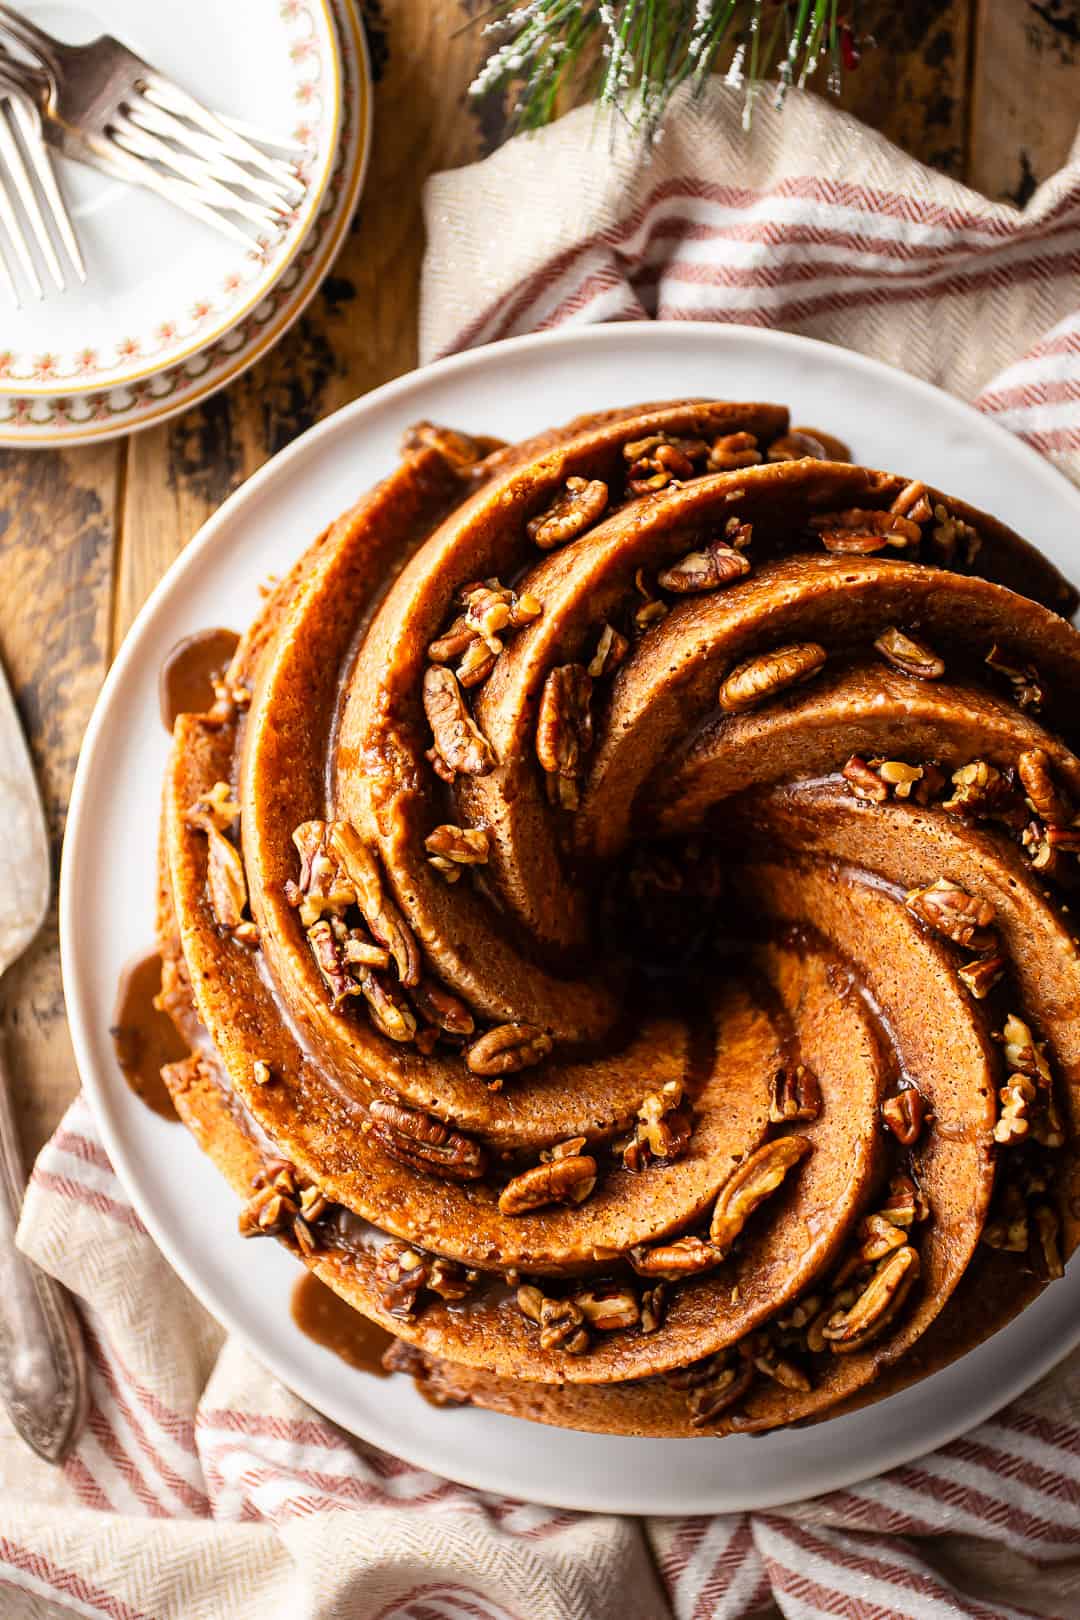 Rum soaked cake, baked in a spiral bundt pan and drenched in a sticky sweet rum glaze.